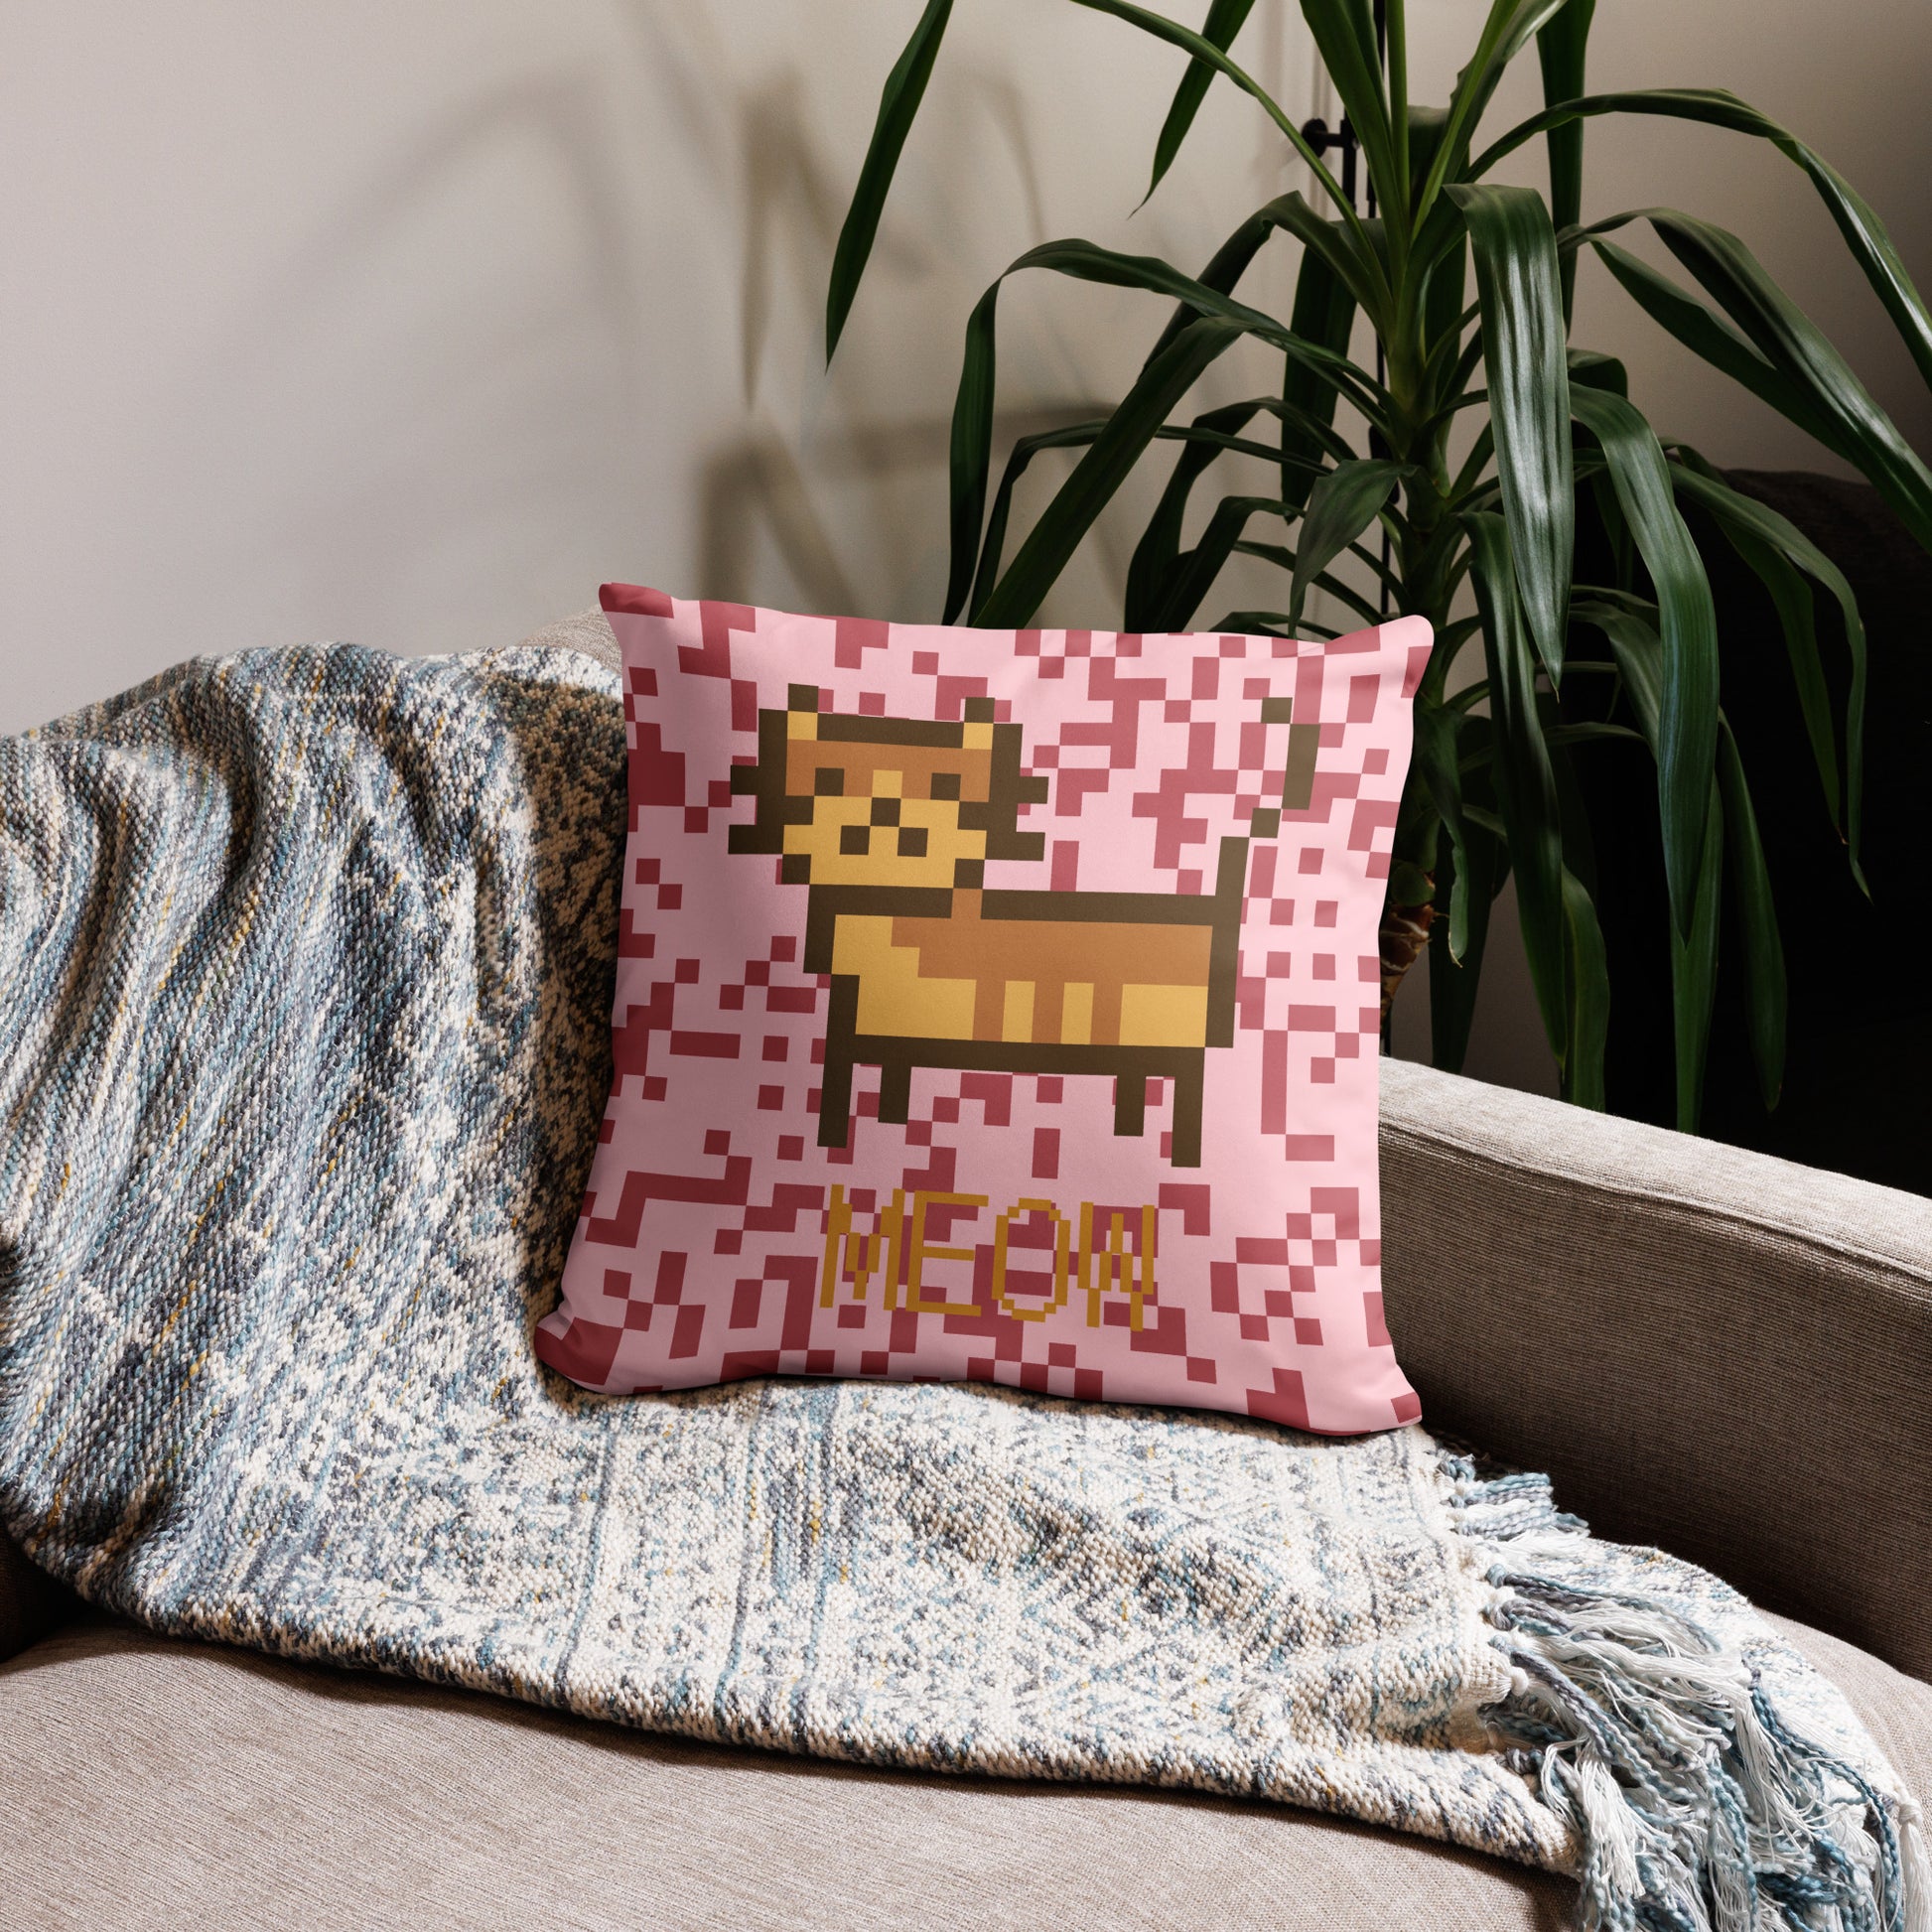 Pink pillow with a pixel photo of a cat and the text MEOW